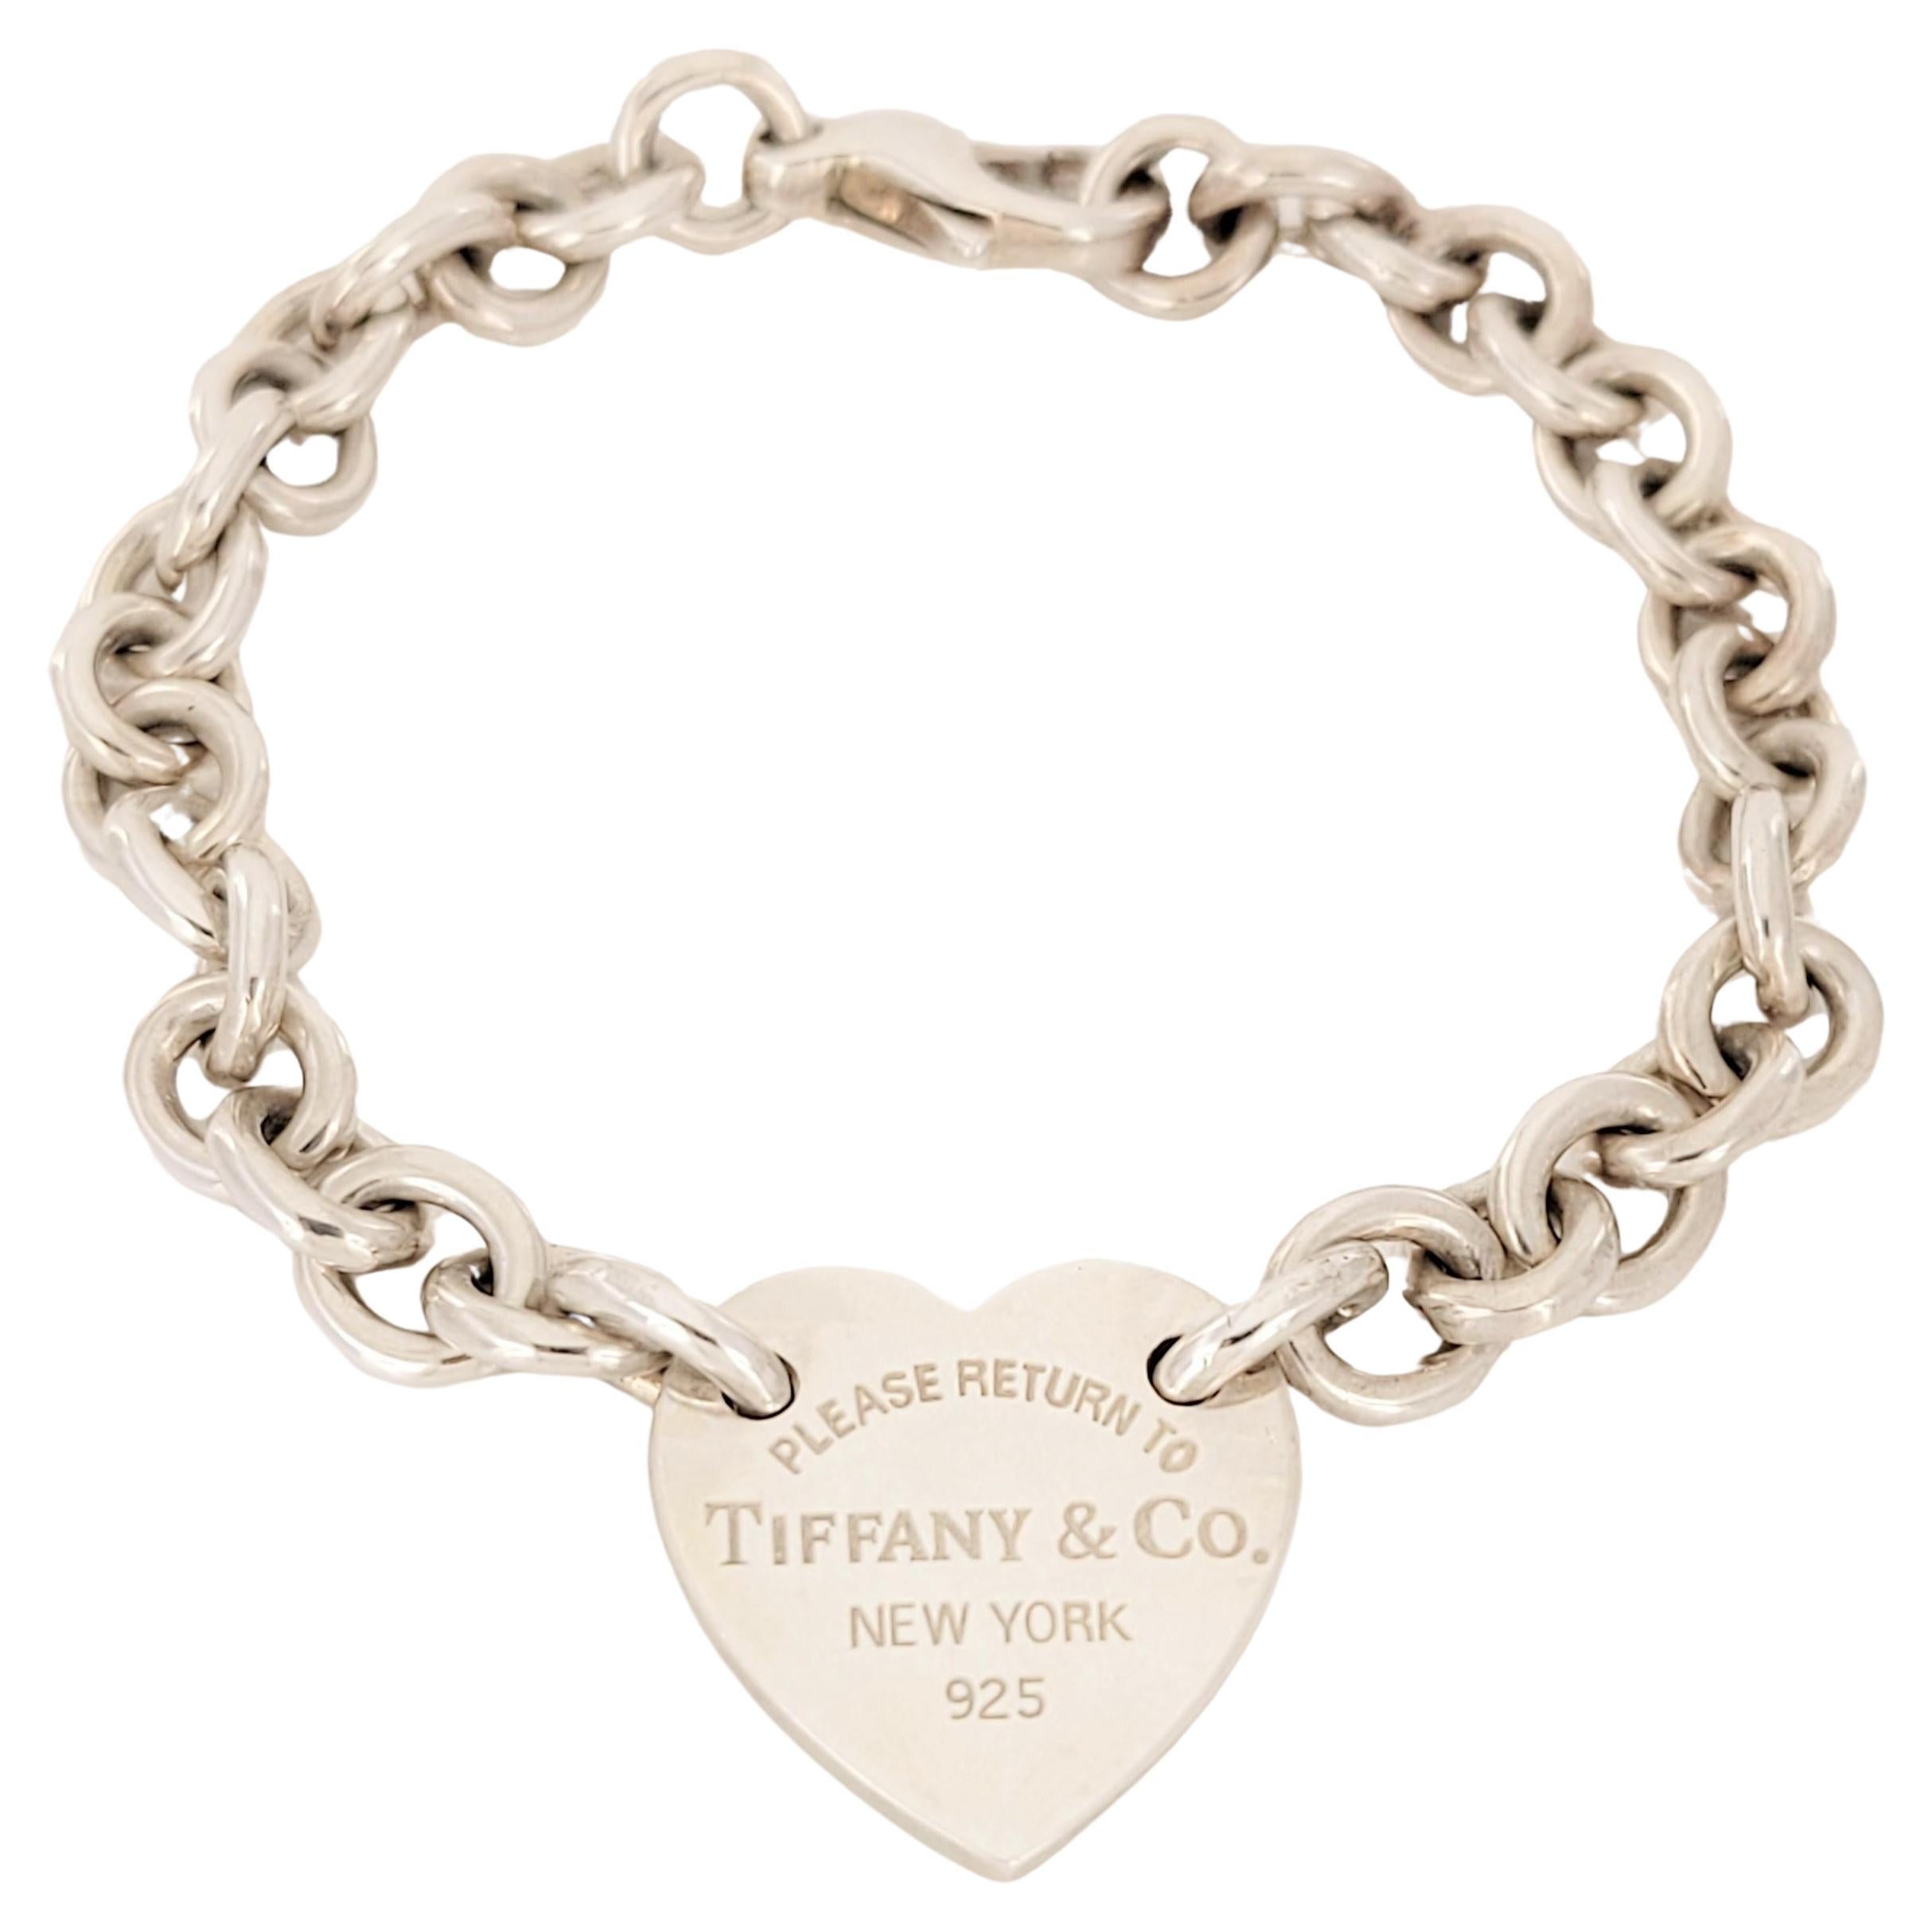 Brand Return to Tiffany & co 
Material Sterling Silver925
Bracelet Length 7.5'' Long
Bracelet Weight 27.4 total gr 
Retail Price $575 
Comes with Tiffany &co pouch